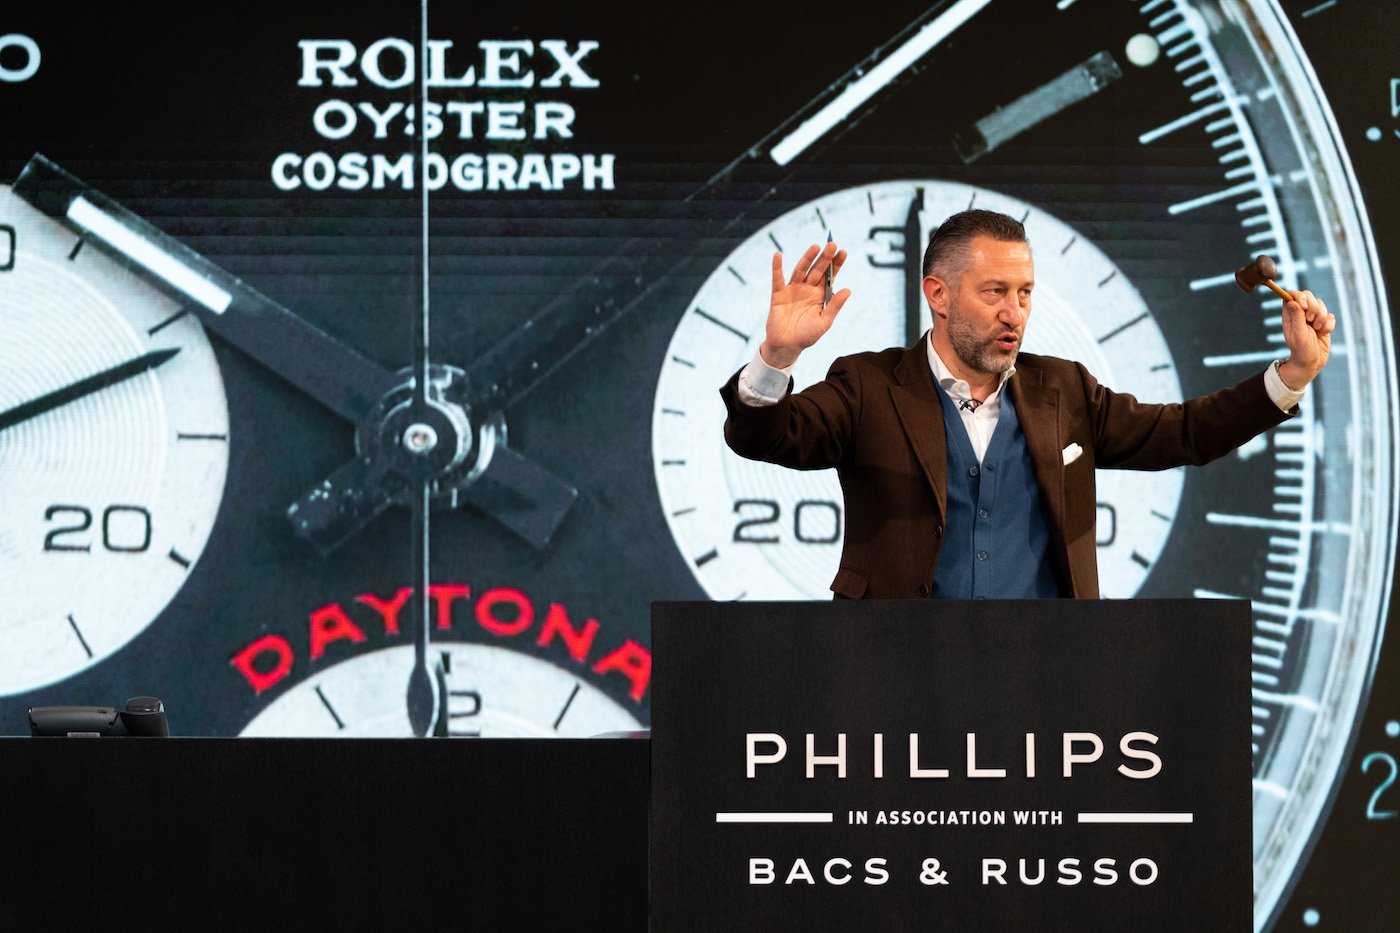 Heuer, Rolex, Panerai: all results of Phillips' “Racing Pulse” auction